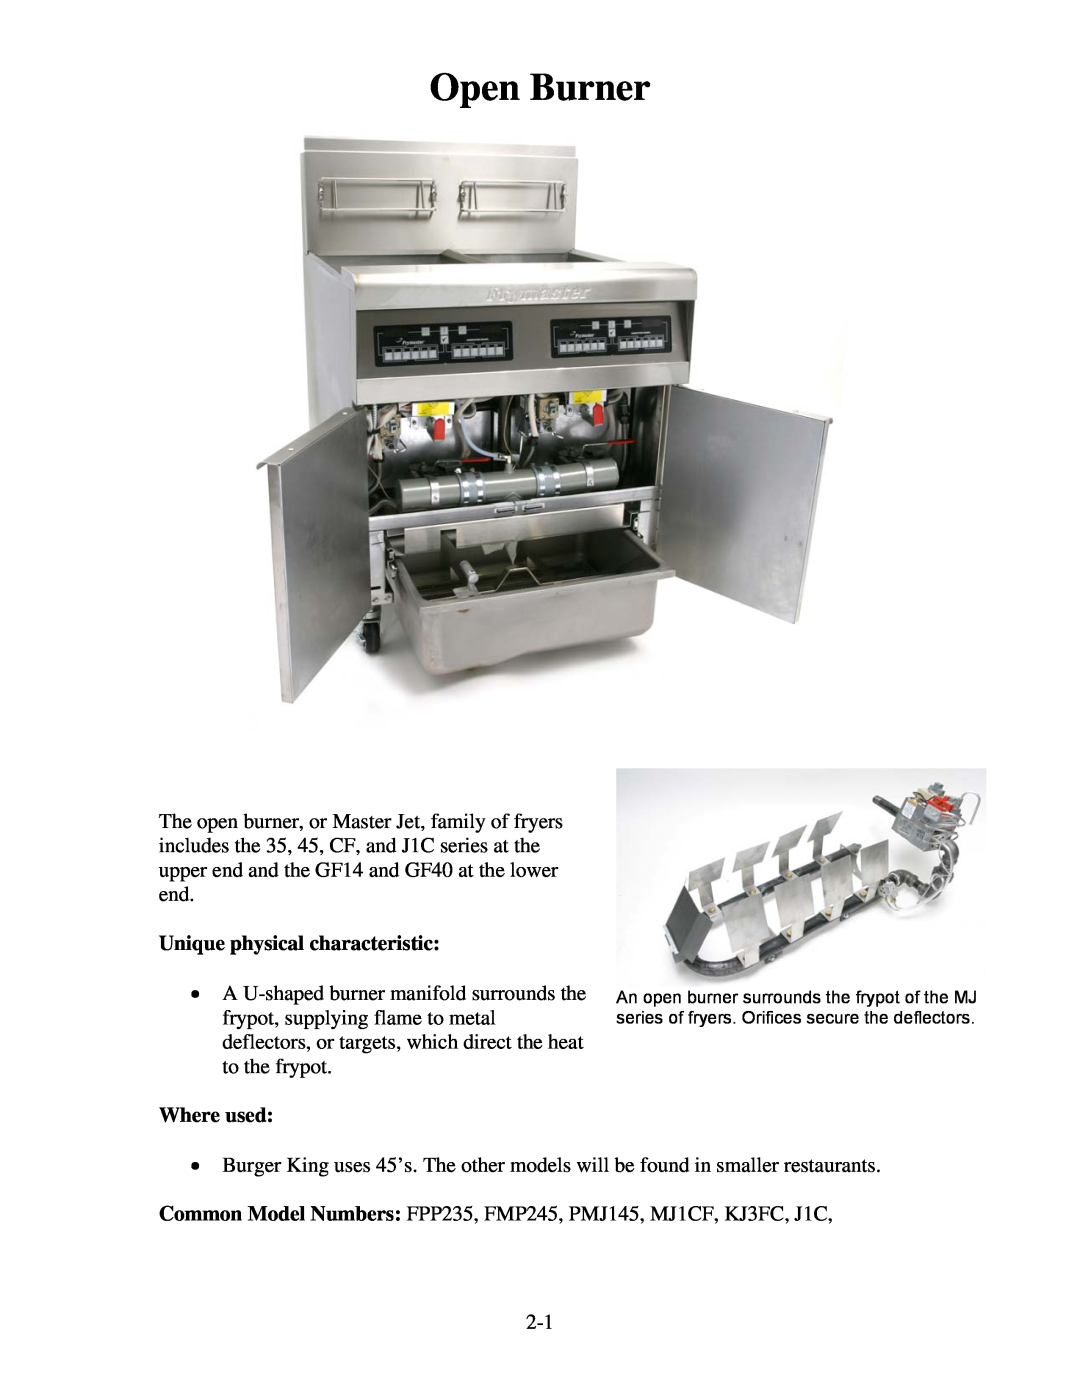 Frymaster H50 manual Open Burner, Where used, Unique physical characteristic 